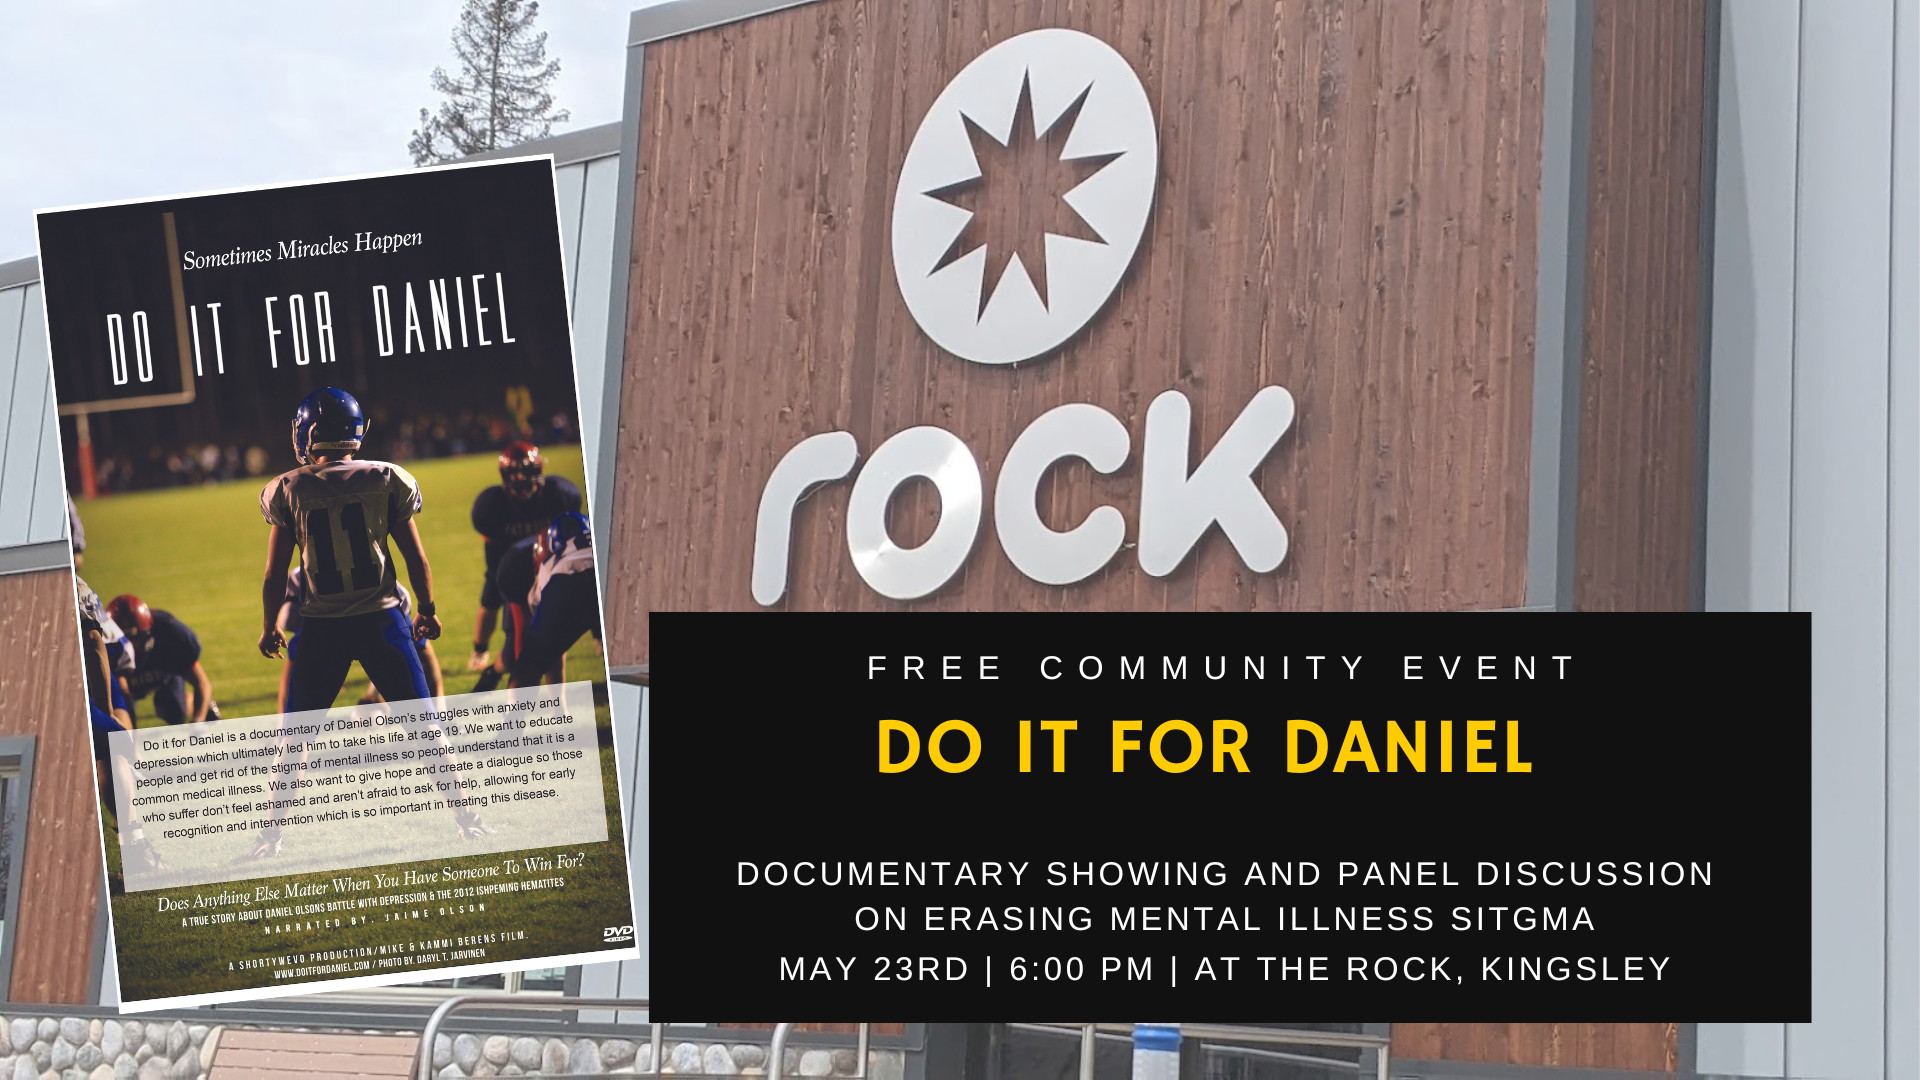 Do It For Daniel documentary flyer, says the date of the event is May 23rd, 2022 at 6pm, and that the event is free and open to the public.